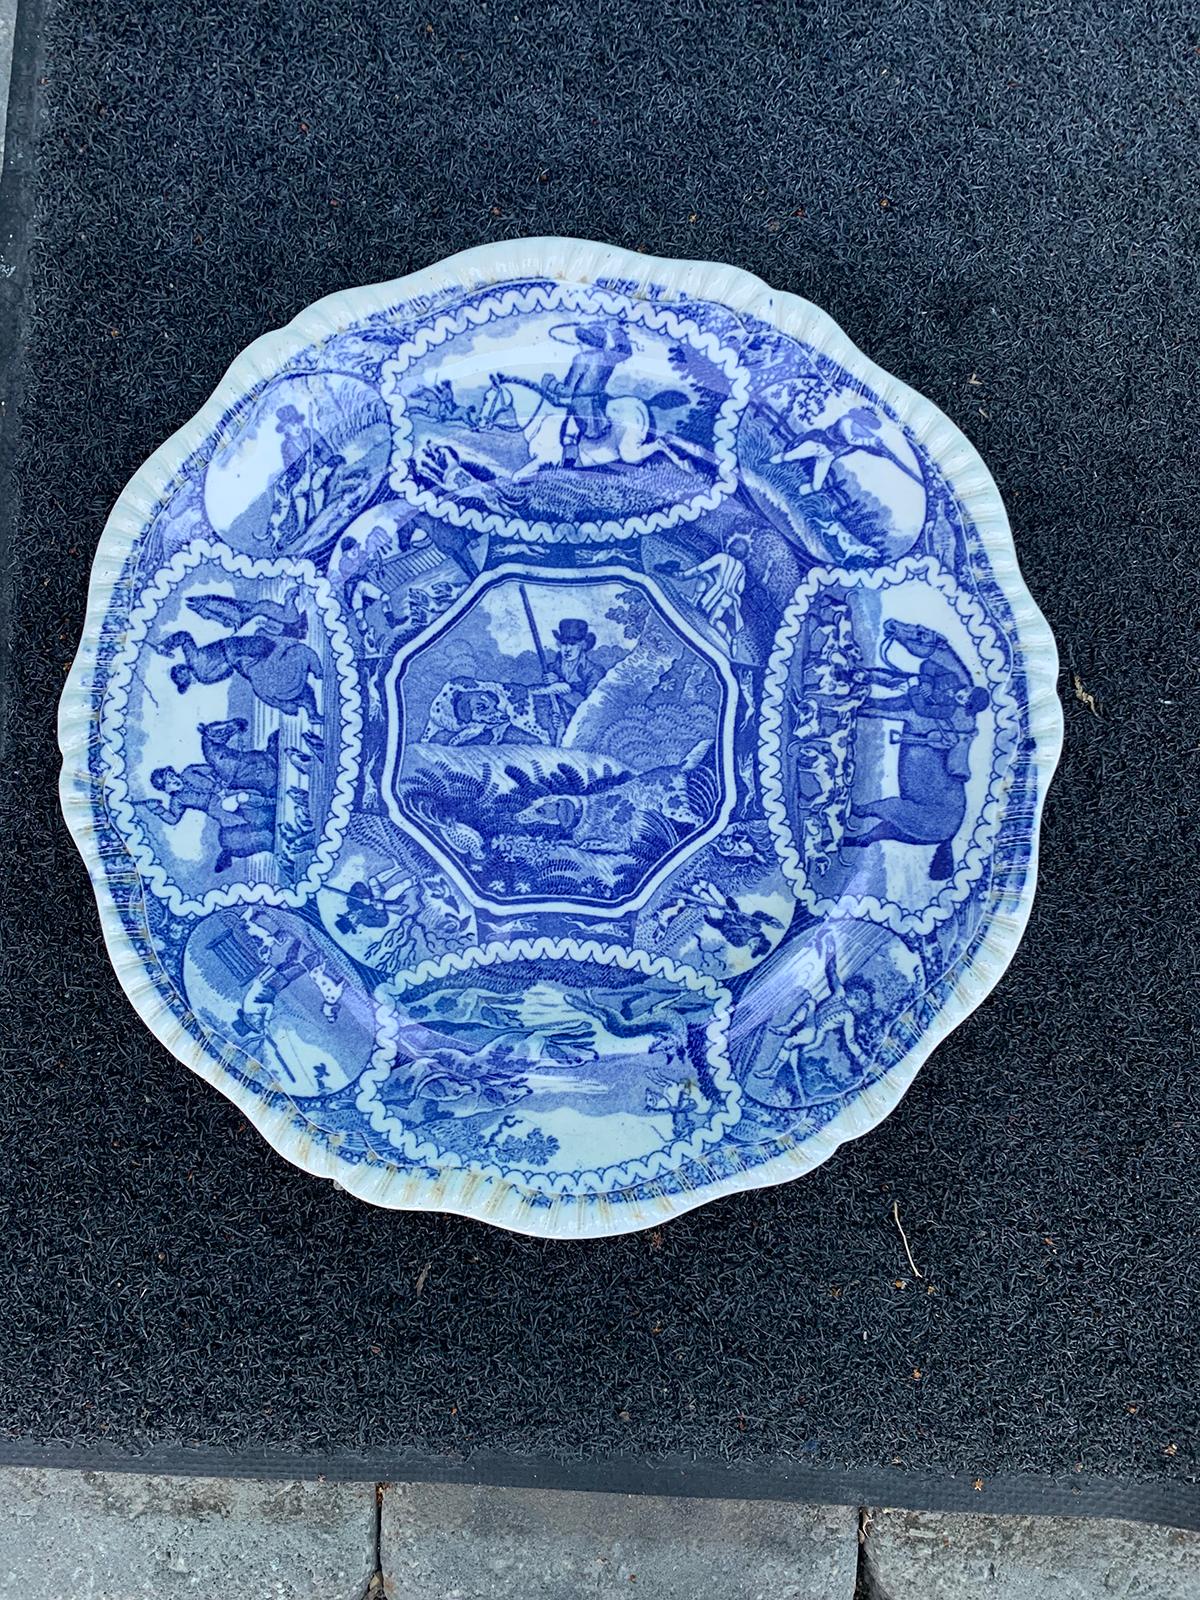 19th century English Copeland Spode blue and white equestrian and fox hunting plate,
circa 1830s-1840s
Marked.